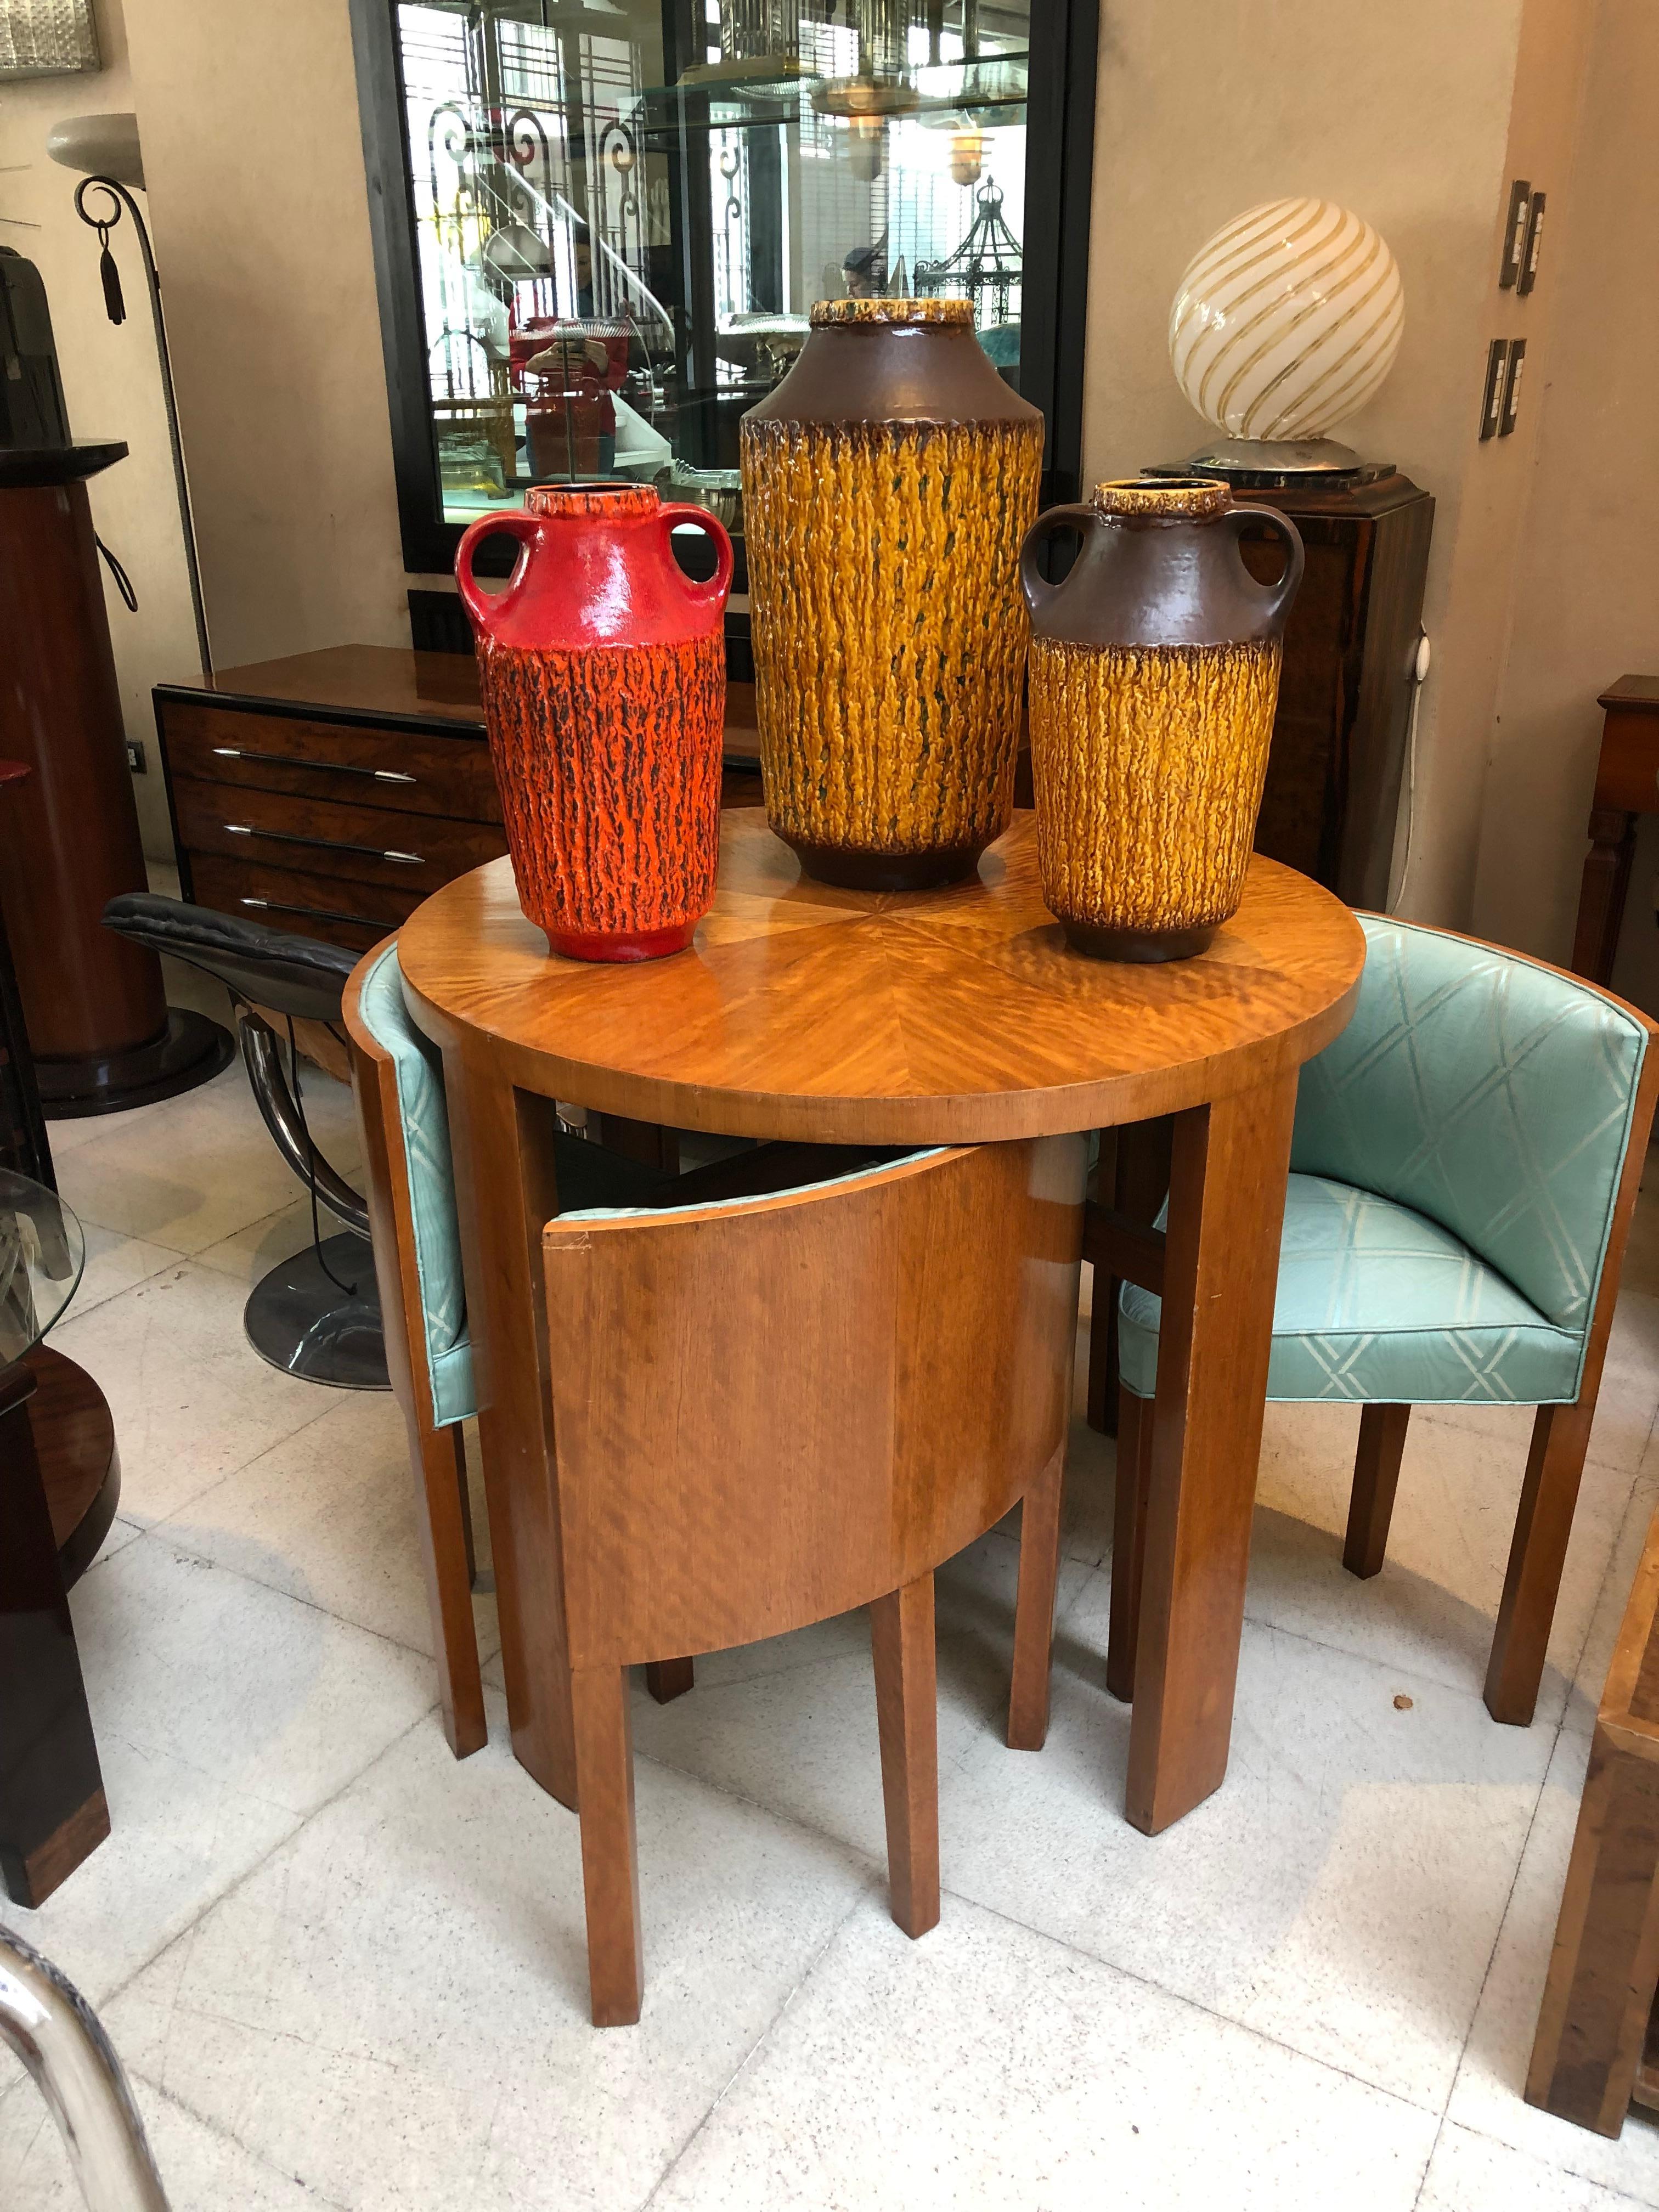 Ceramic
We have specialized in the sale of Art Deco and Art Nouveau and Vintage styles since 1982. If you have any questions we are at your disposal.
Pushing the button that reads 'View All From Seller'. And you can see more objects to the style